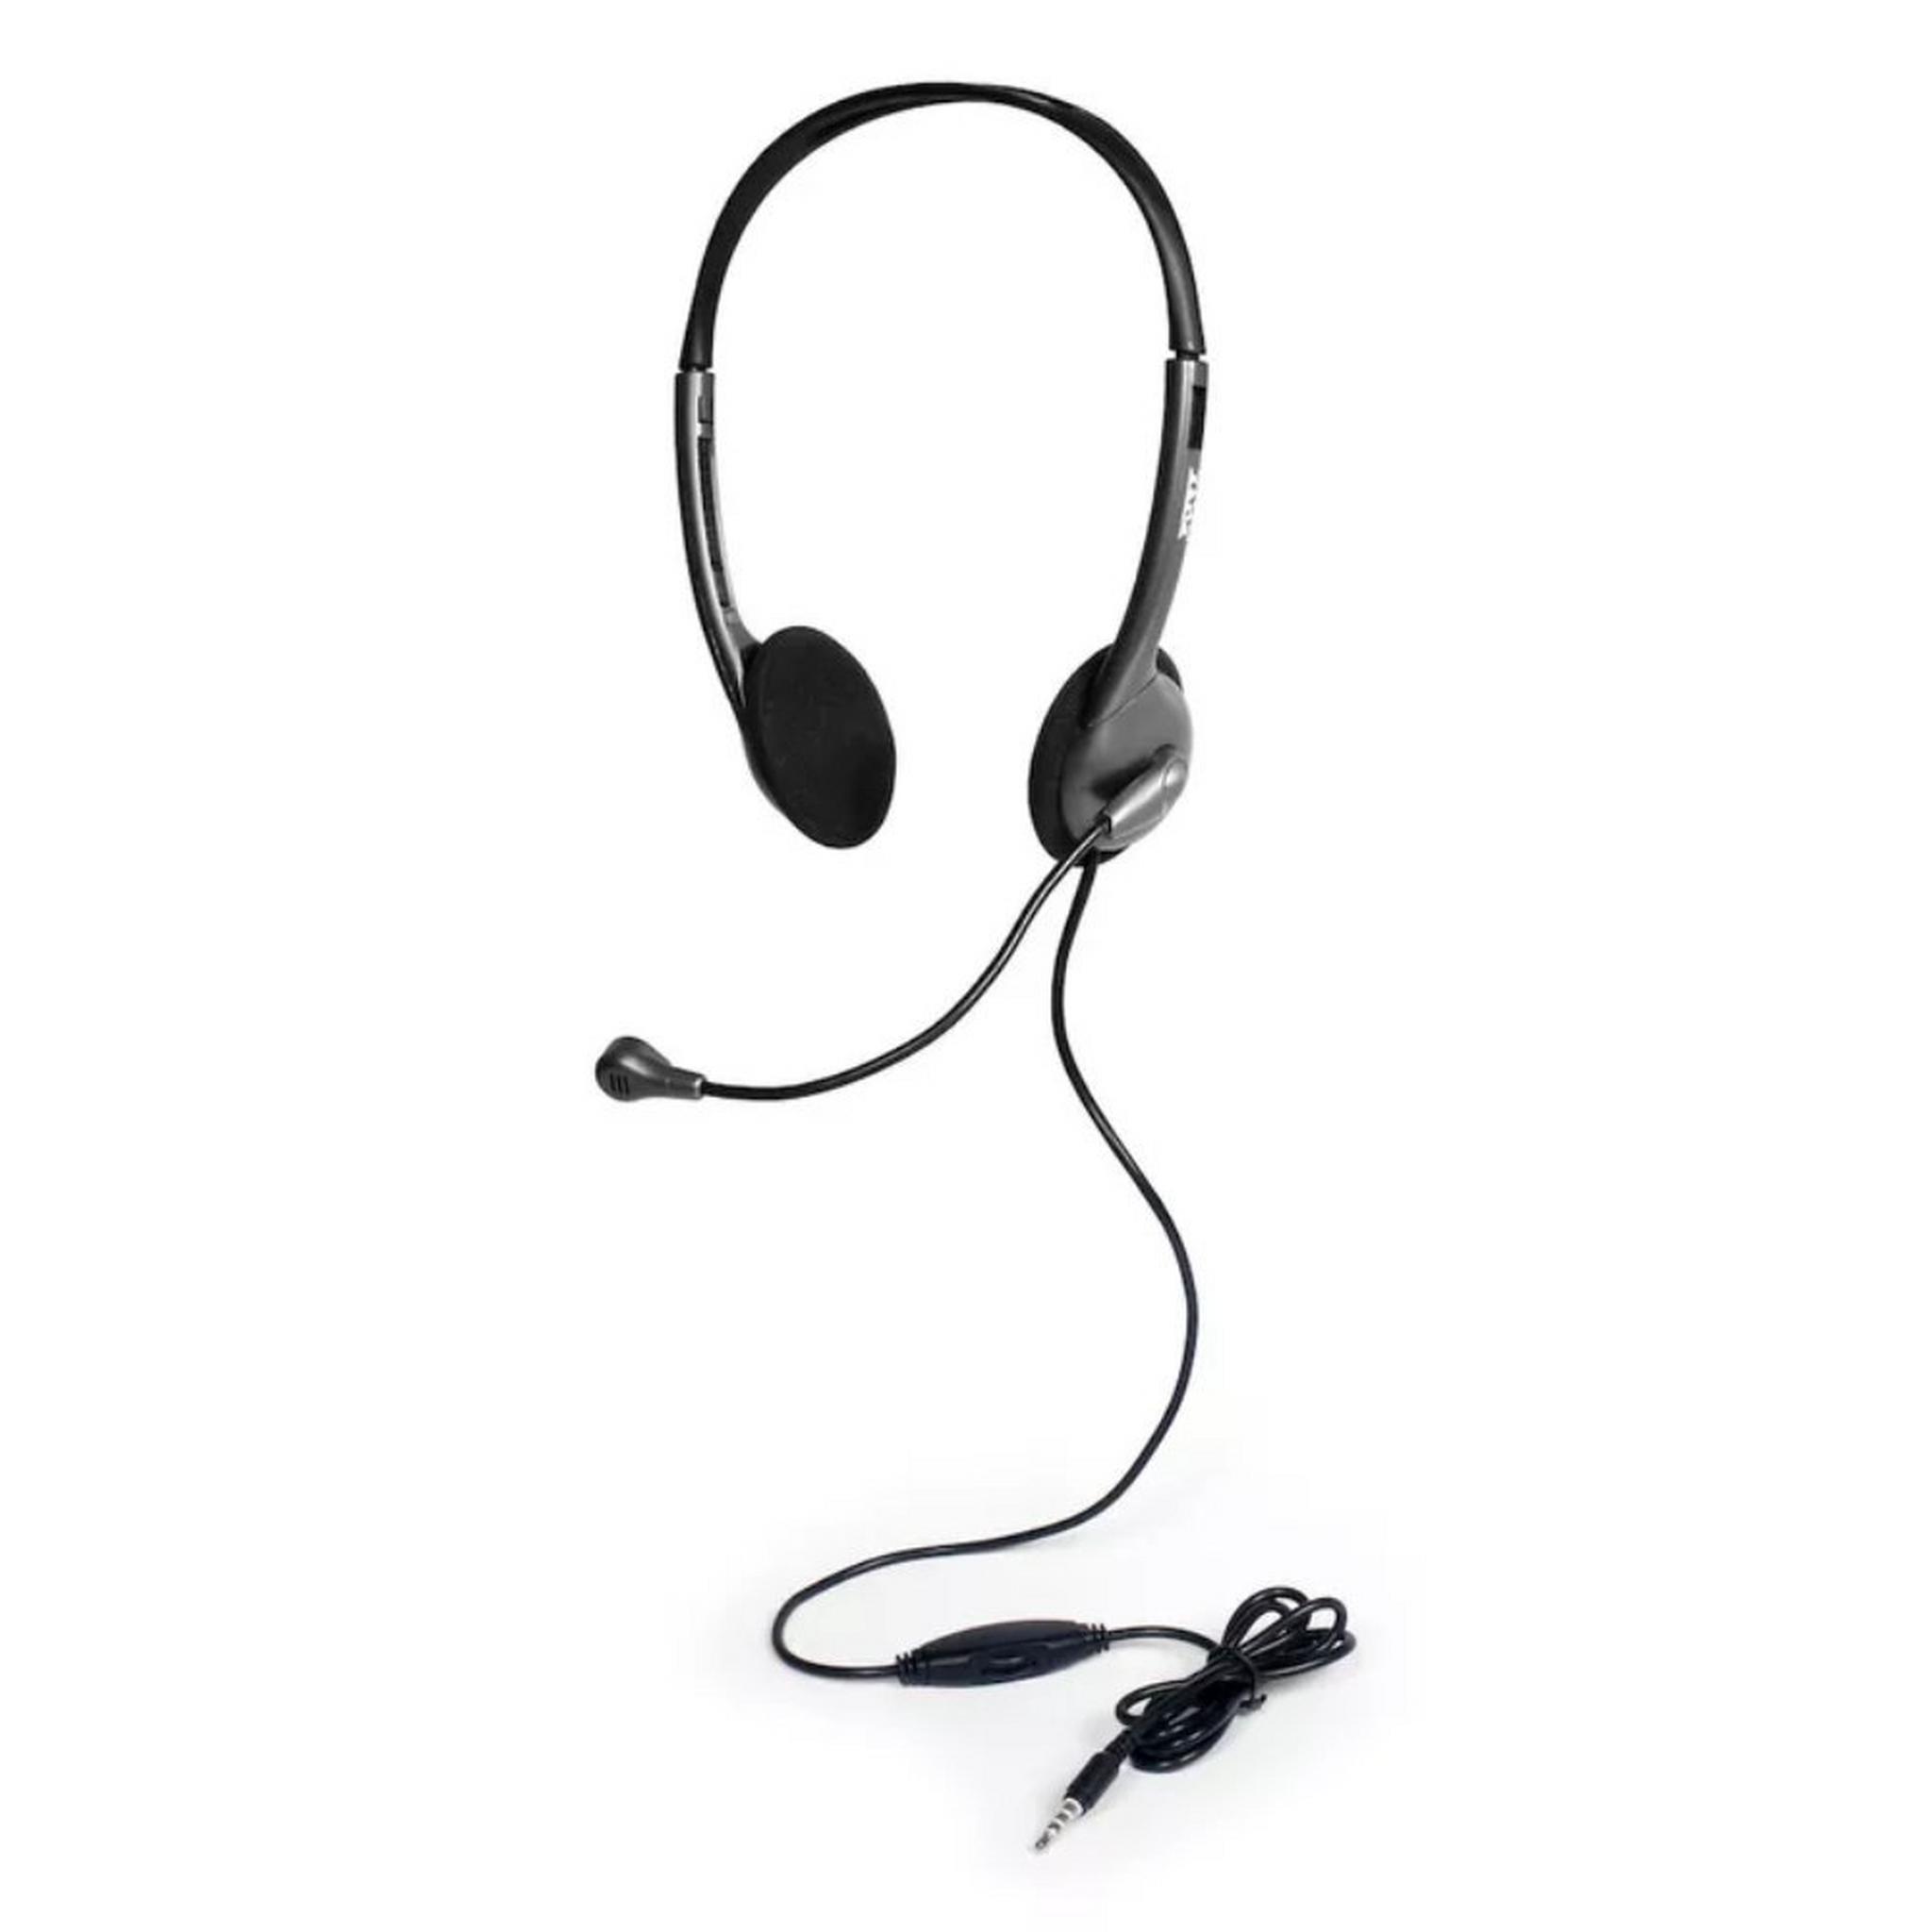 Port Designs Black Stereo Headset With Microphone (901603)